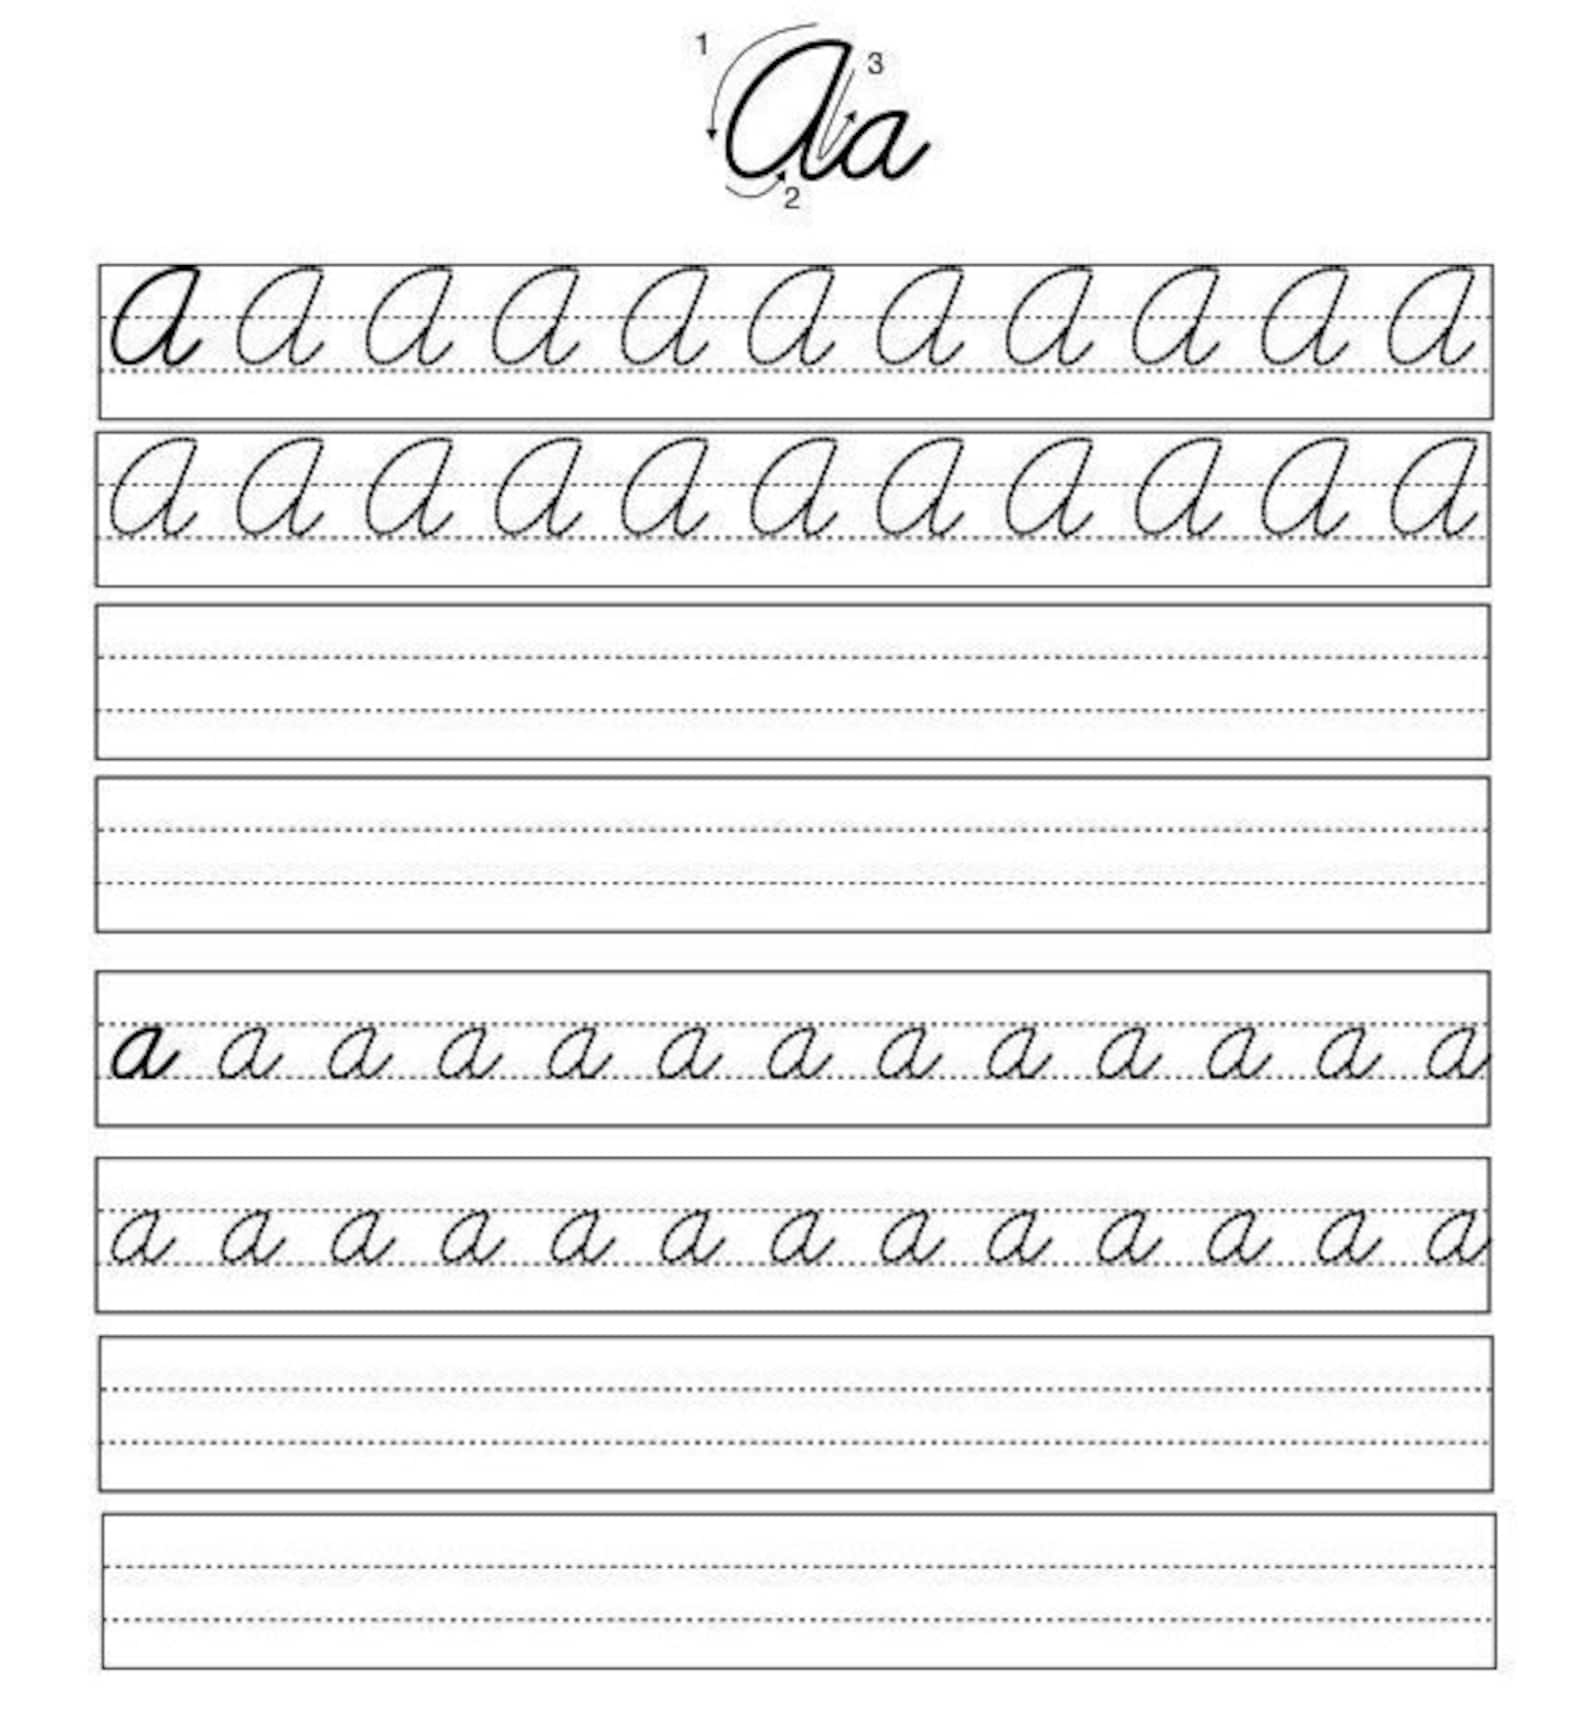 Practice Cursive Writing for Beginners: Downloadable | Etsy